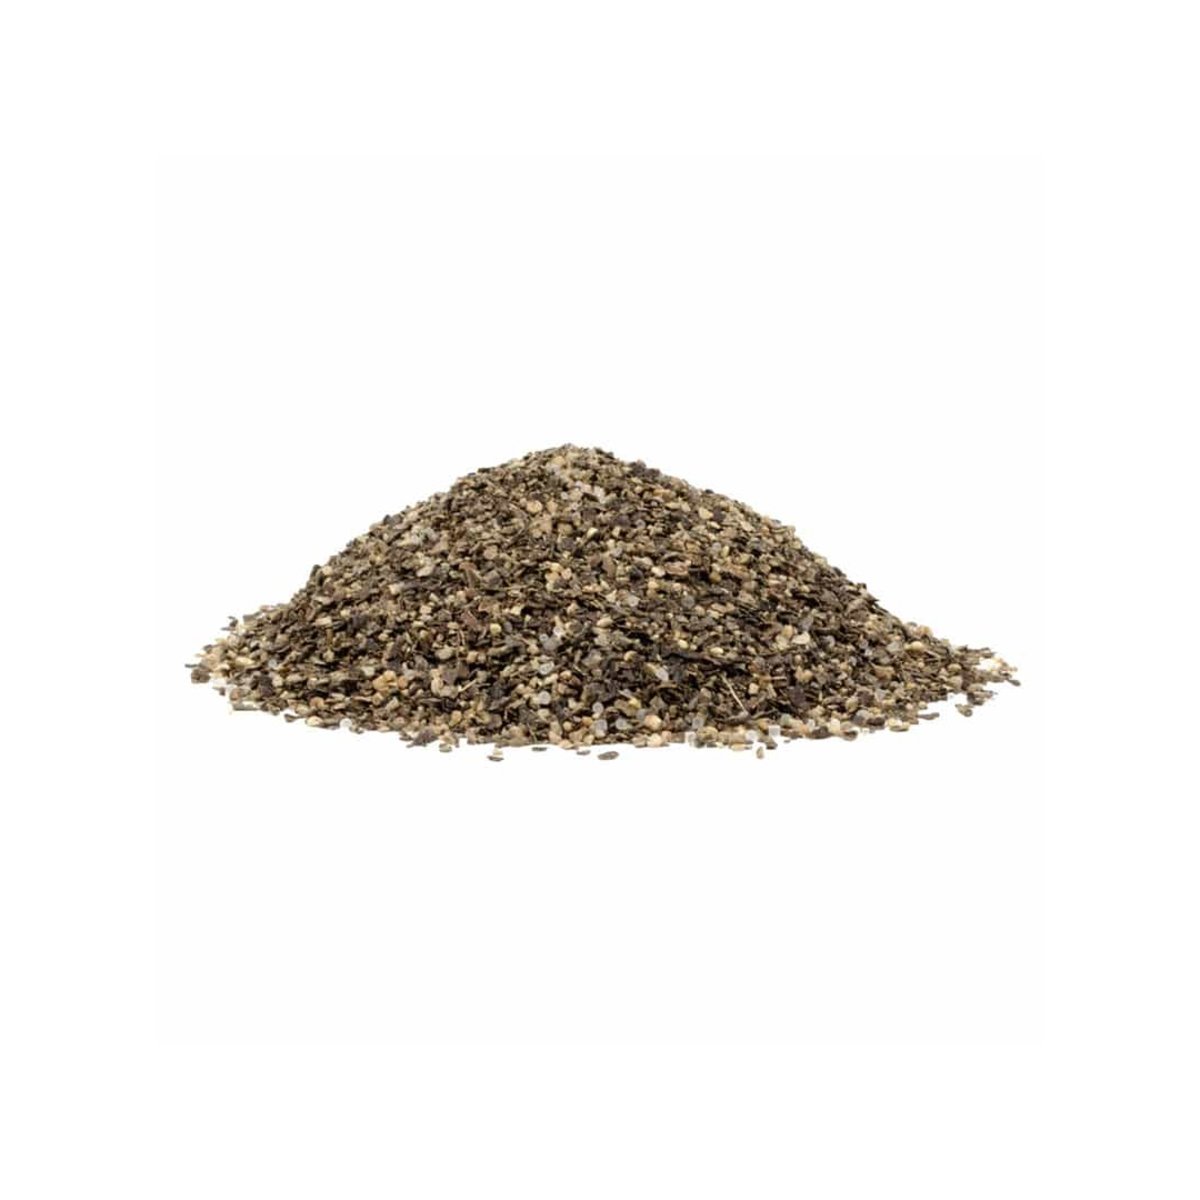 Crushed Black Pepper 100g Approx Weight